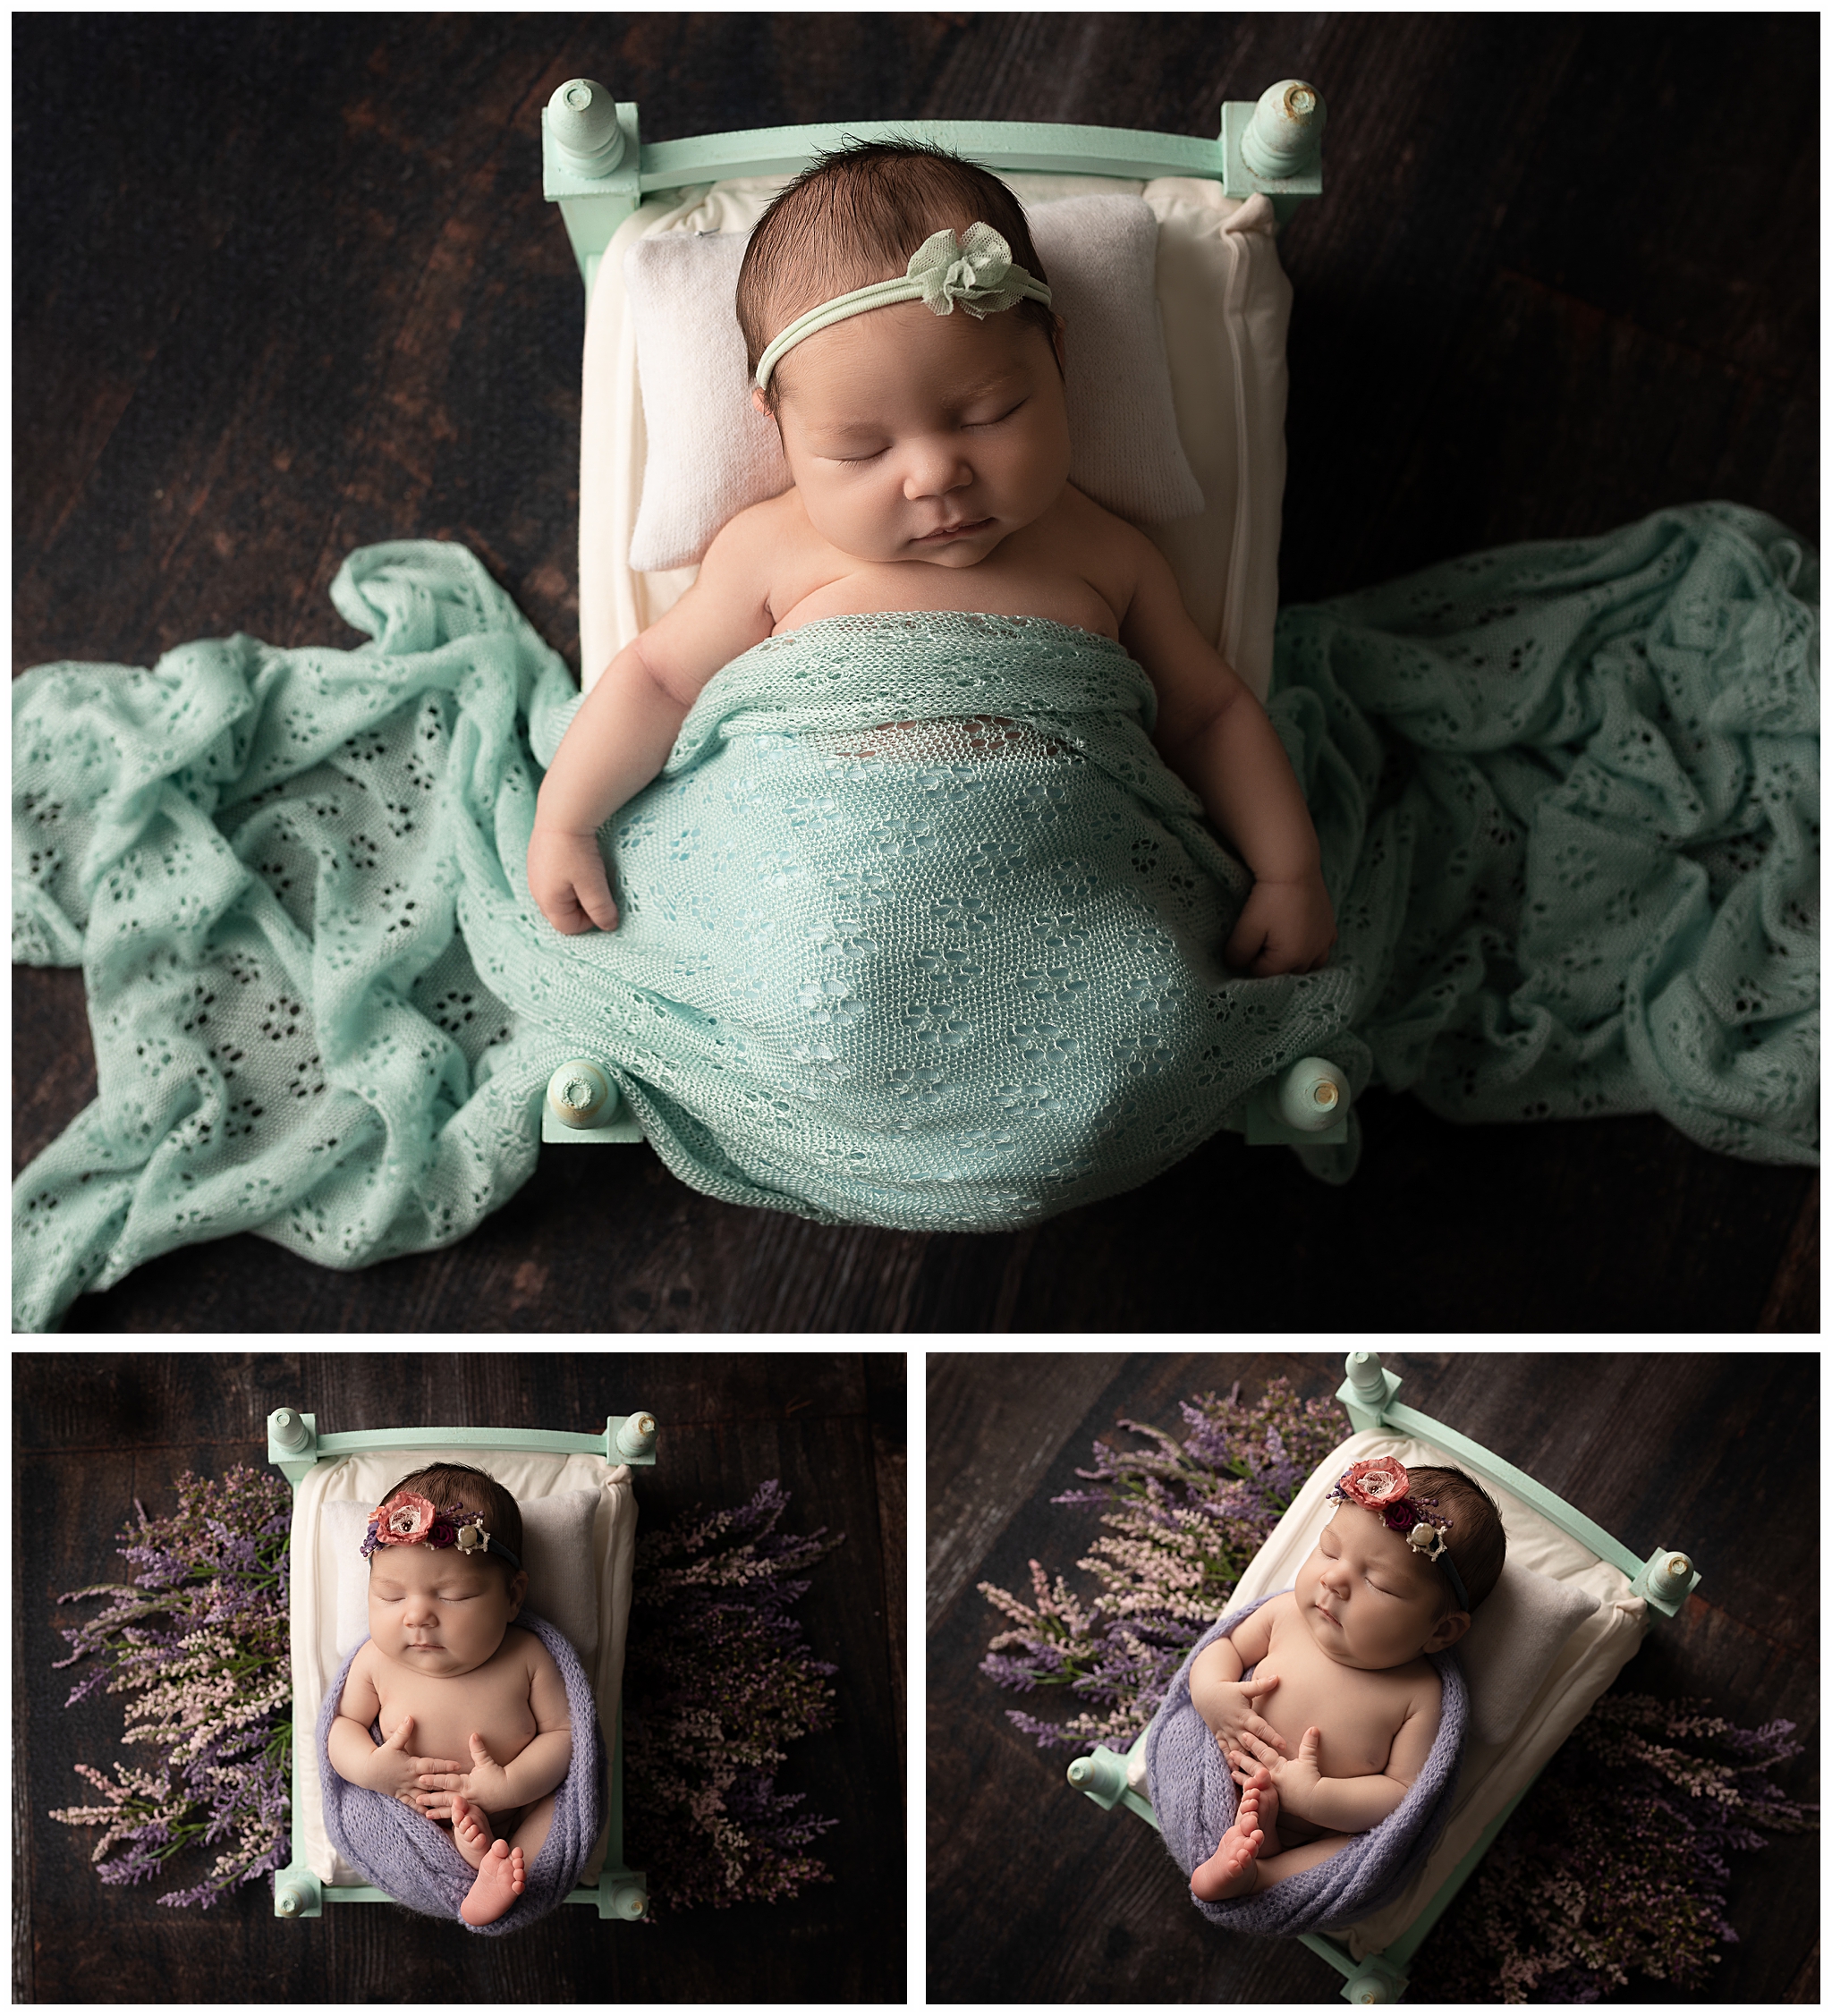 Newborn baby sleeping in turquoise baby bed with flowers